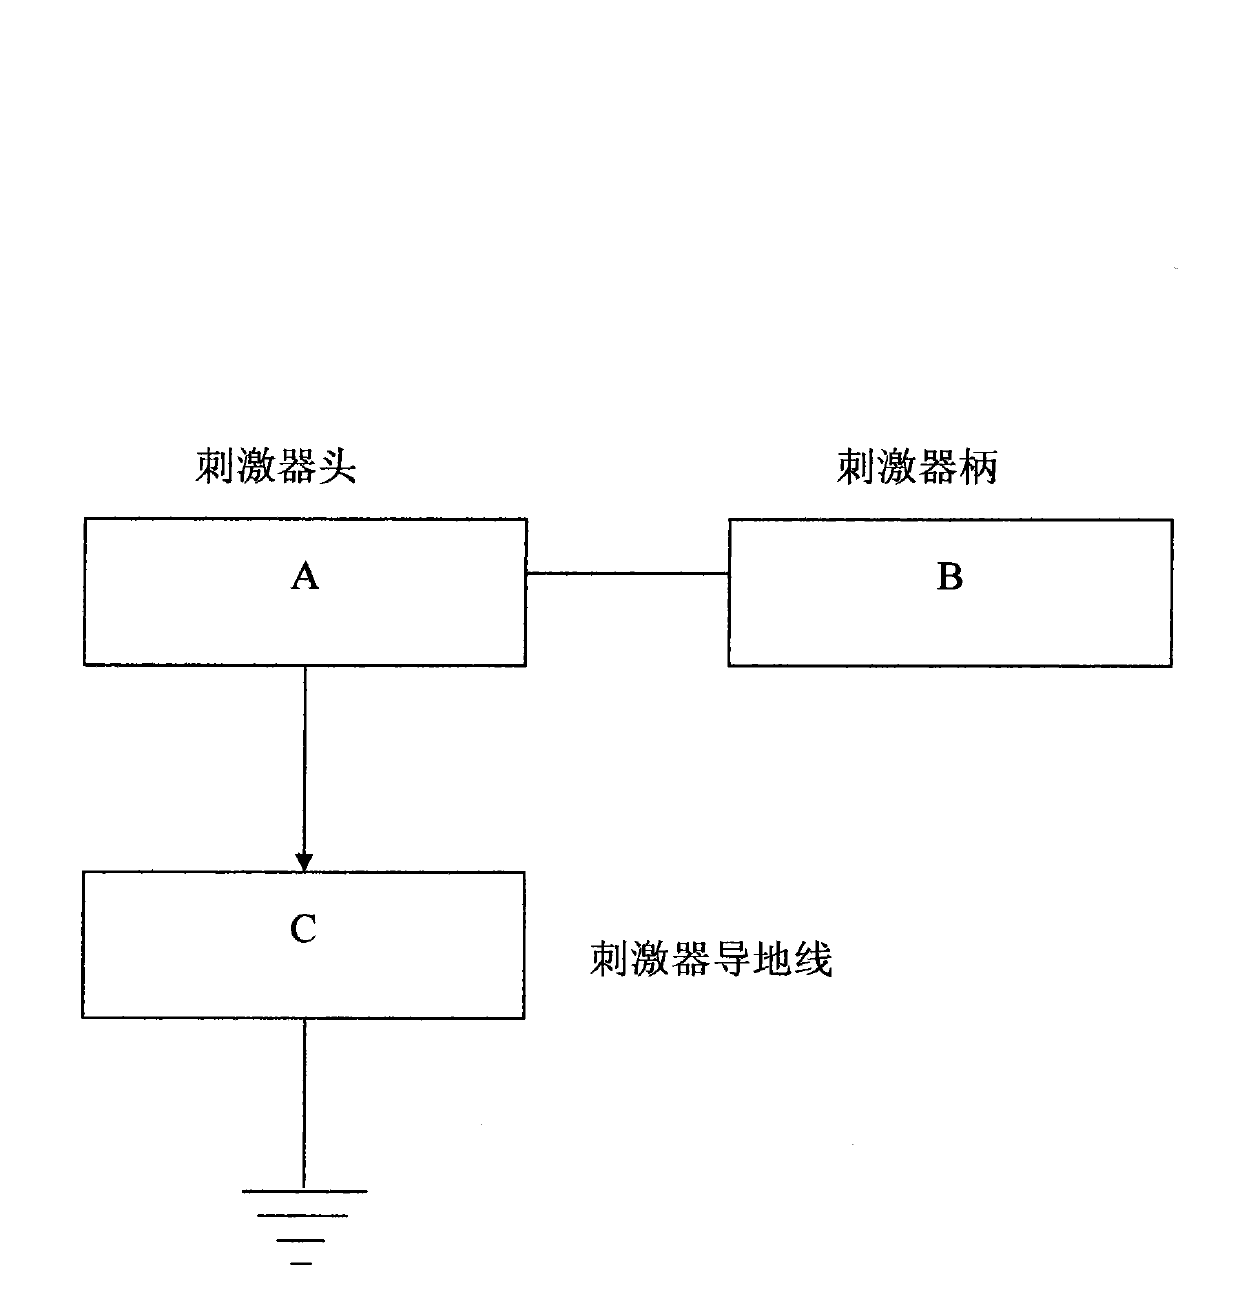 Biological negative electricity insomnia recovery therapeutic apparatus equipment system